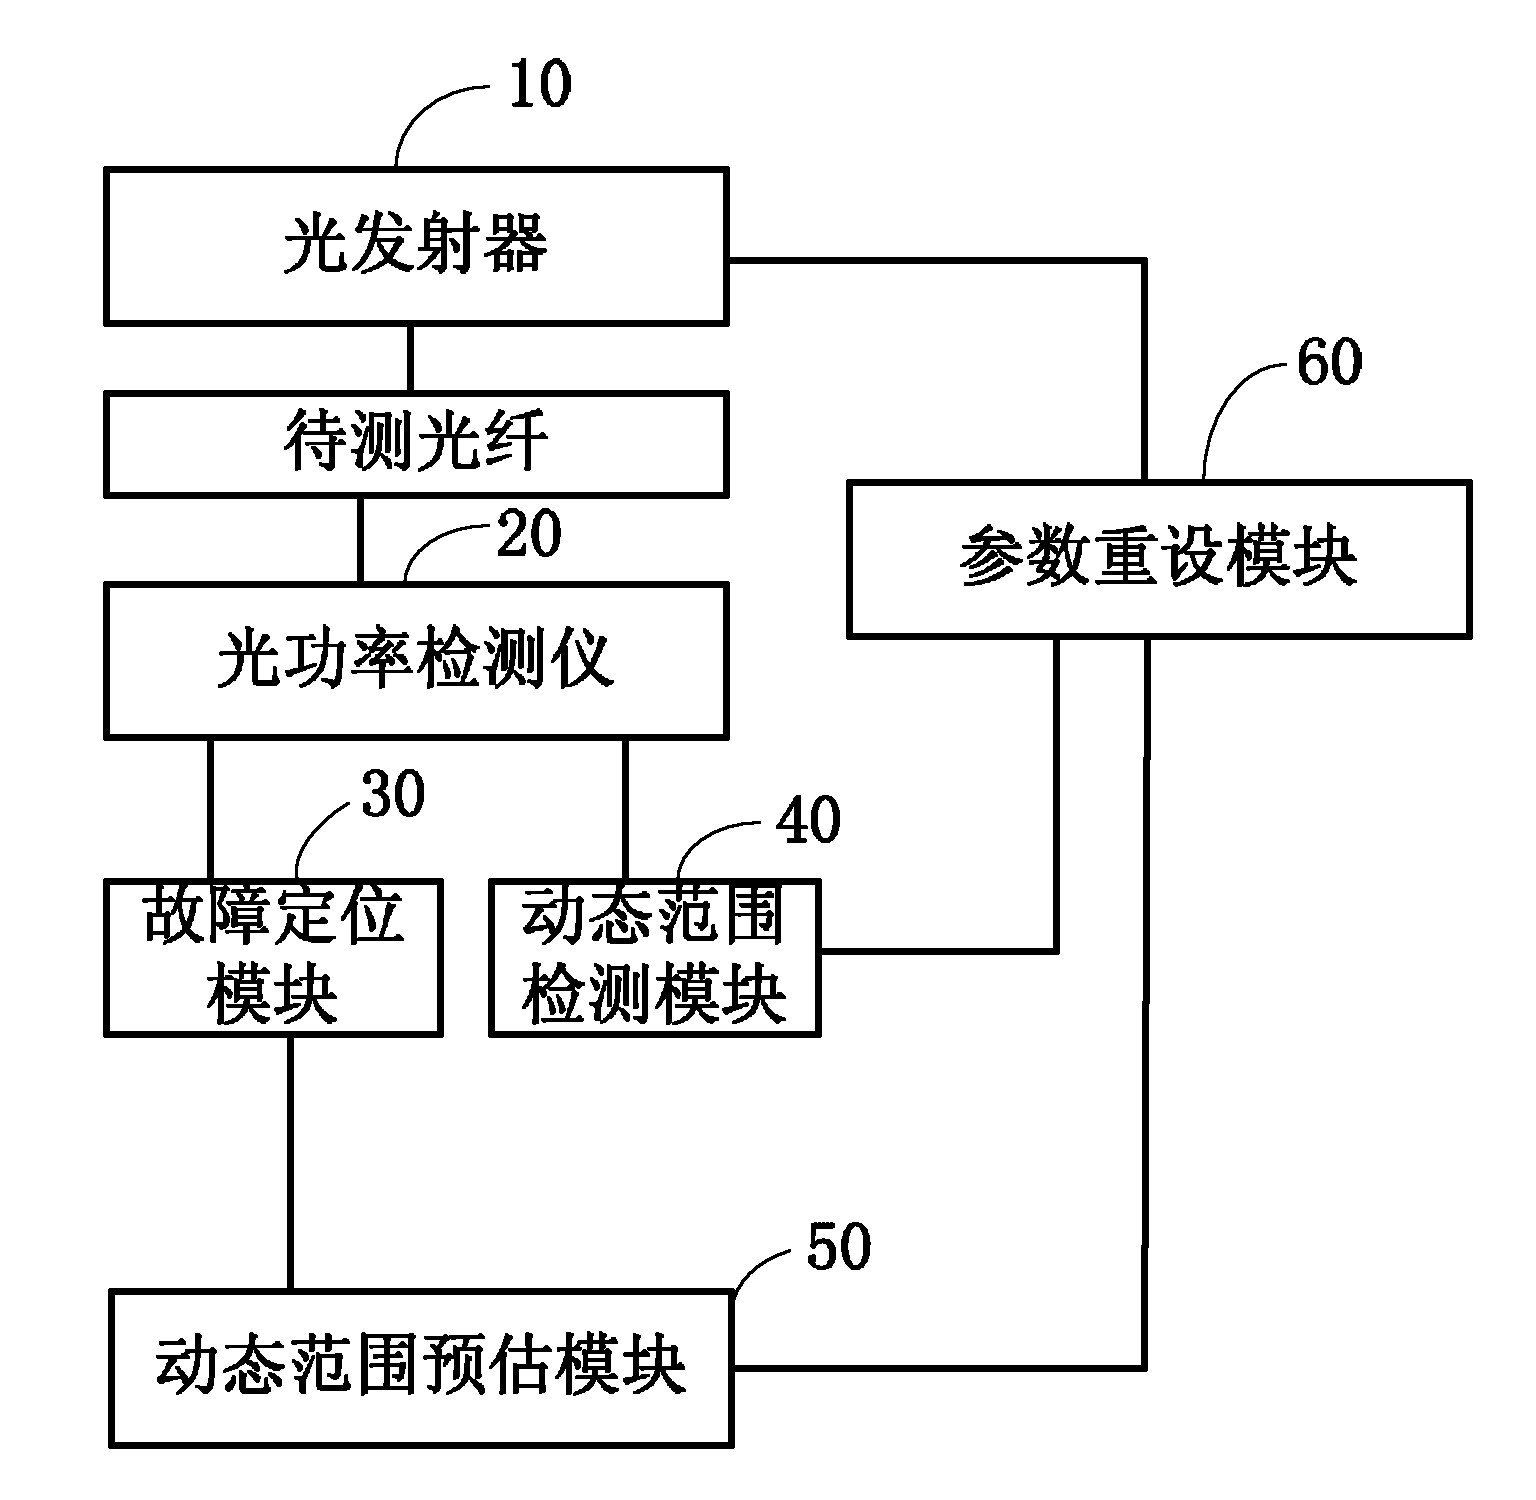 Optical fiber failure positioning system and method